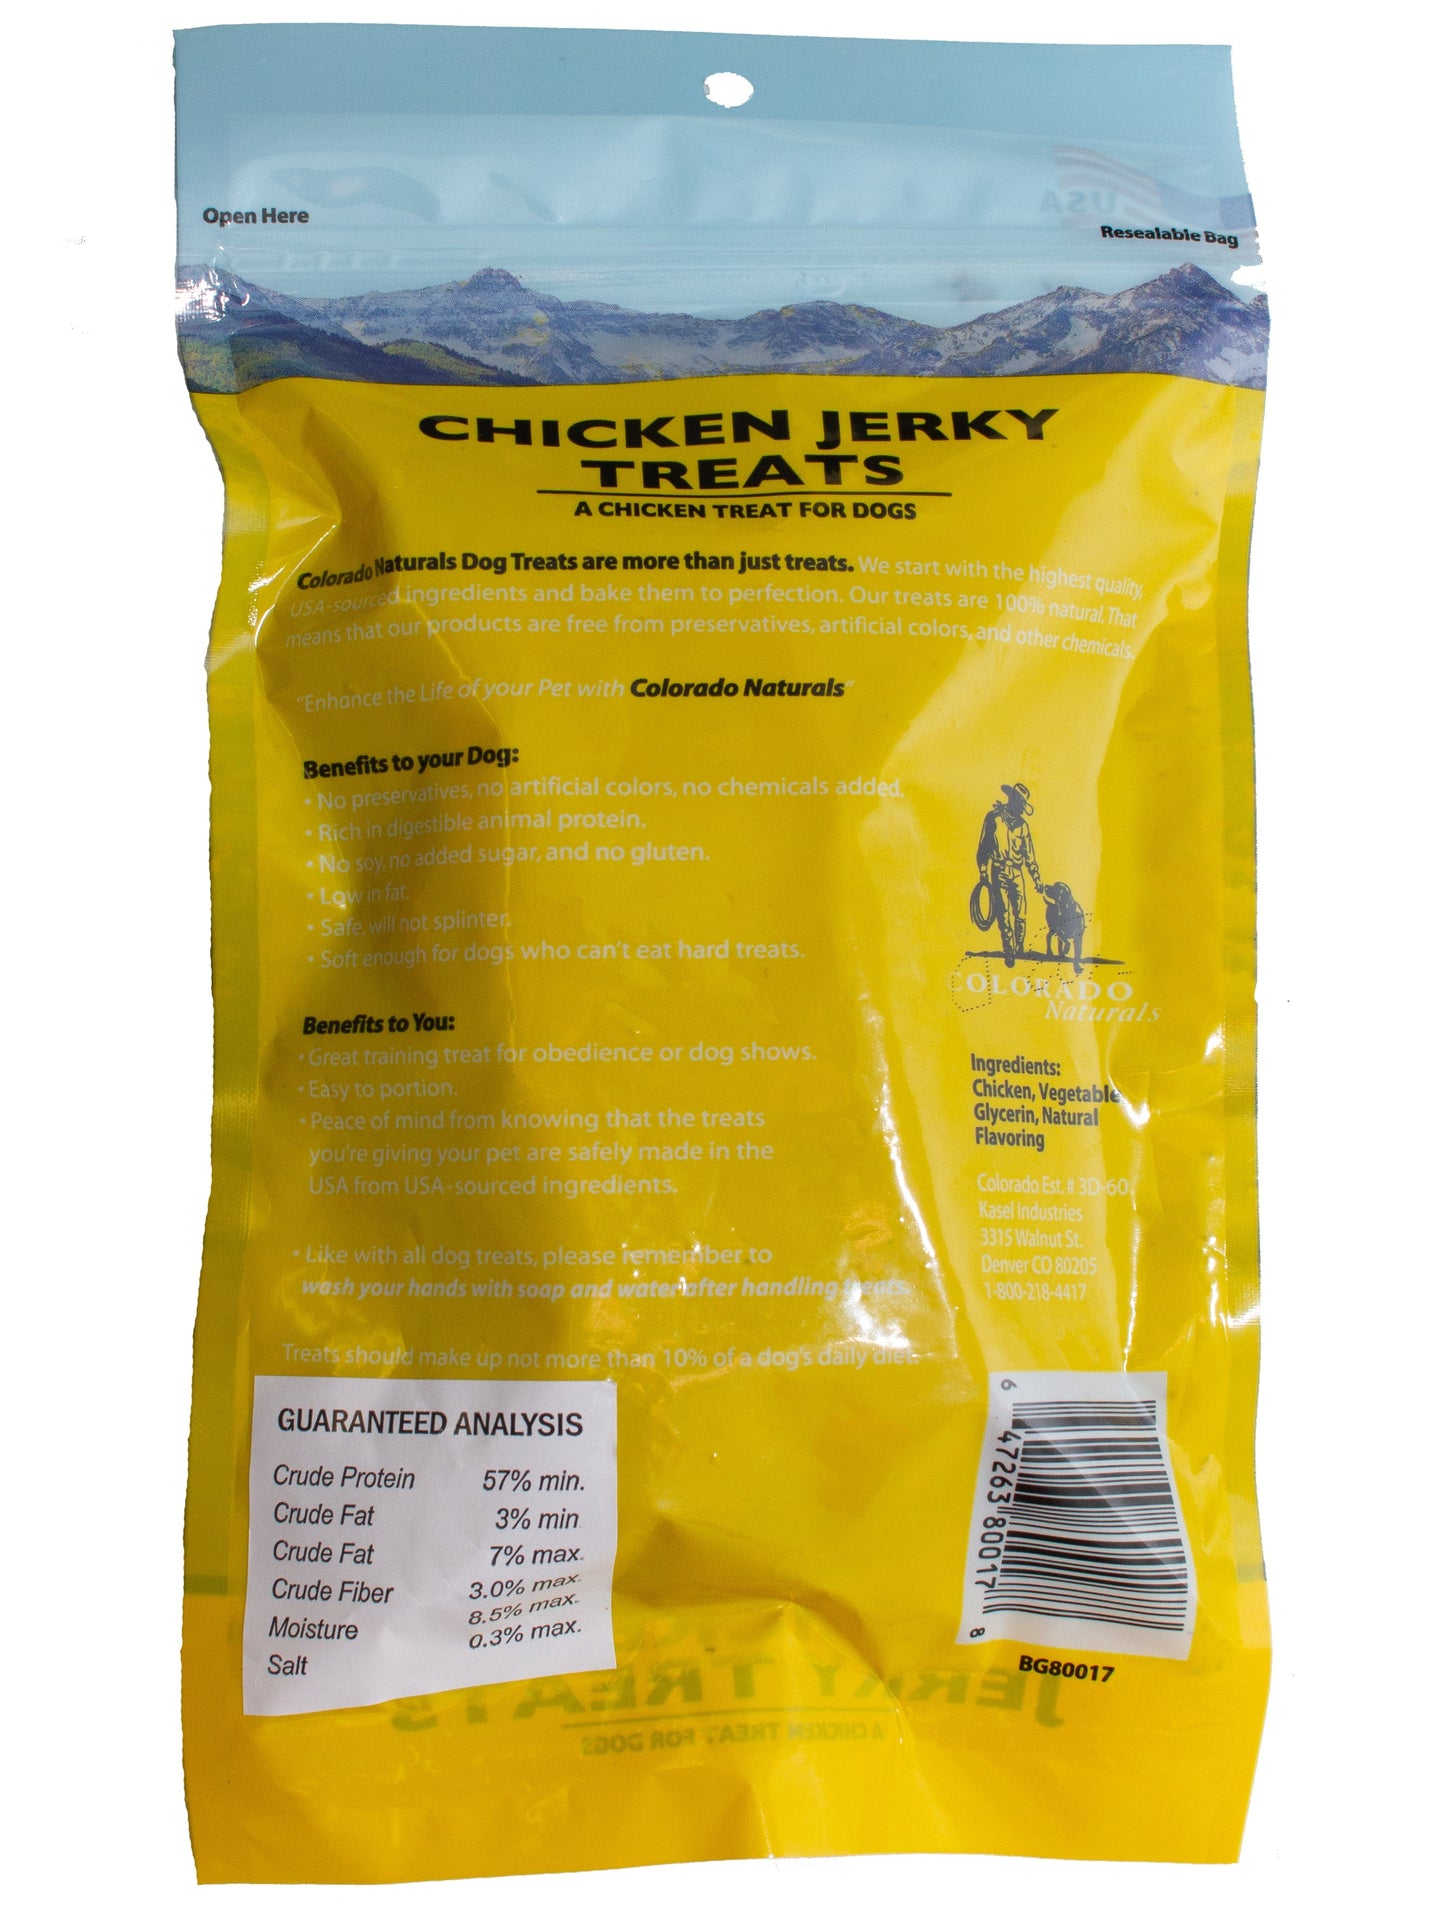 A photo of the back of the best 4 oz Chicken Jerky Dog Treats from Colorado Pet Treats by Colorado Naturals. Colorado Pet Treats - All-Natural, All-American Dog Jerky, Jerky Chips, and Bones - Treat your furry friend to our delicious and healthy pet treats made with only the finest ingredients sourced in the USA. Delicious and chewy all-American dog jerky made with natural ingredients sourced in Colorado.